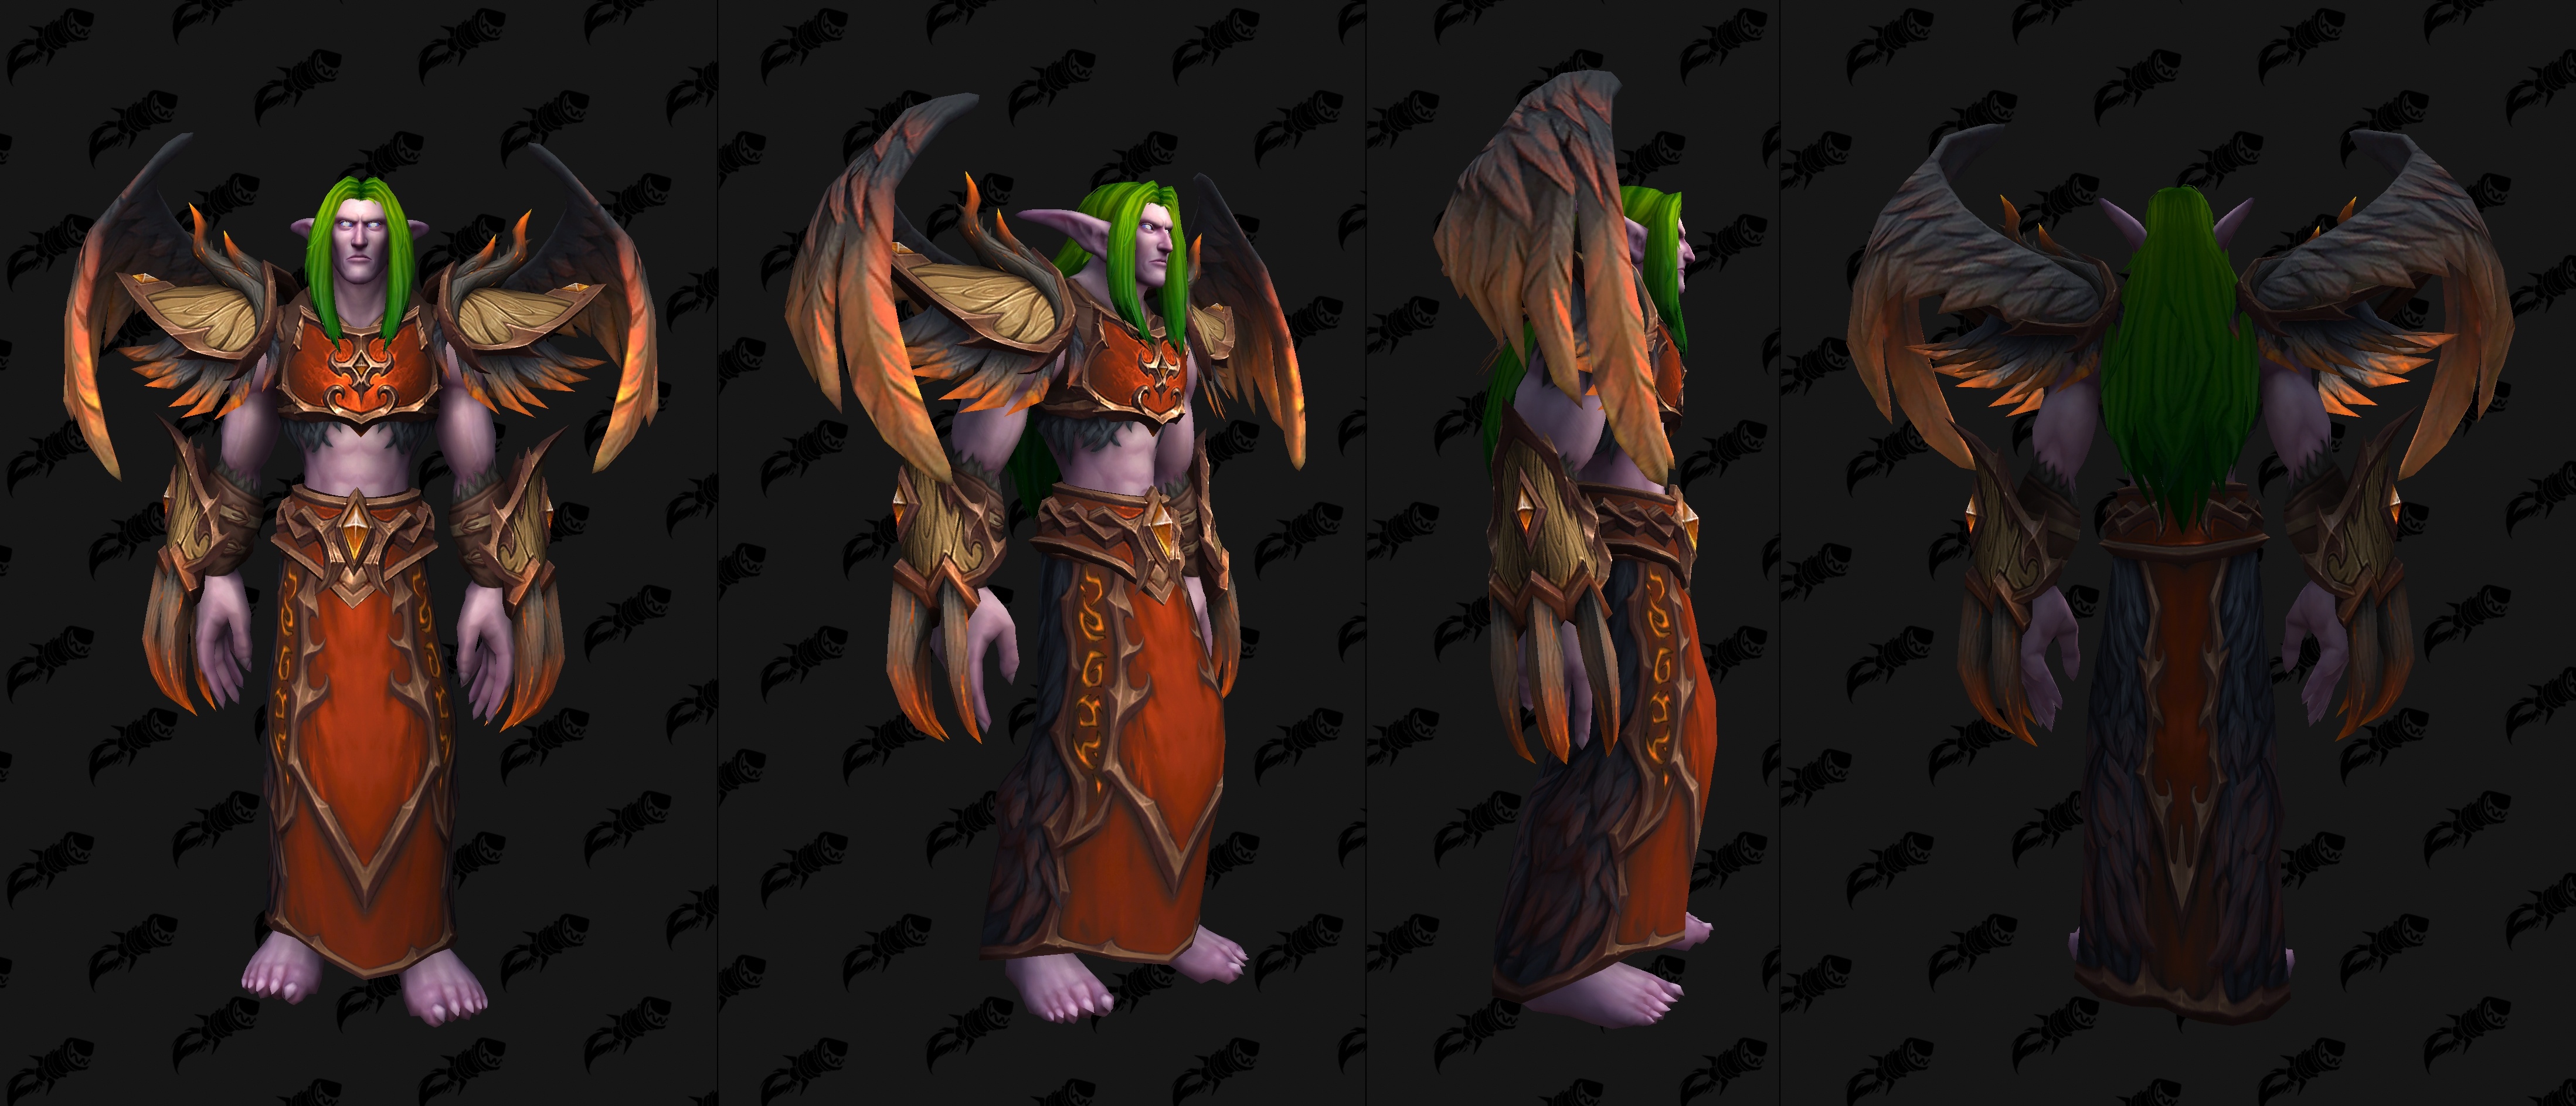 Druid of the flame armor set